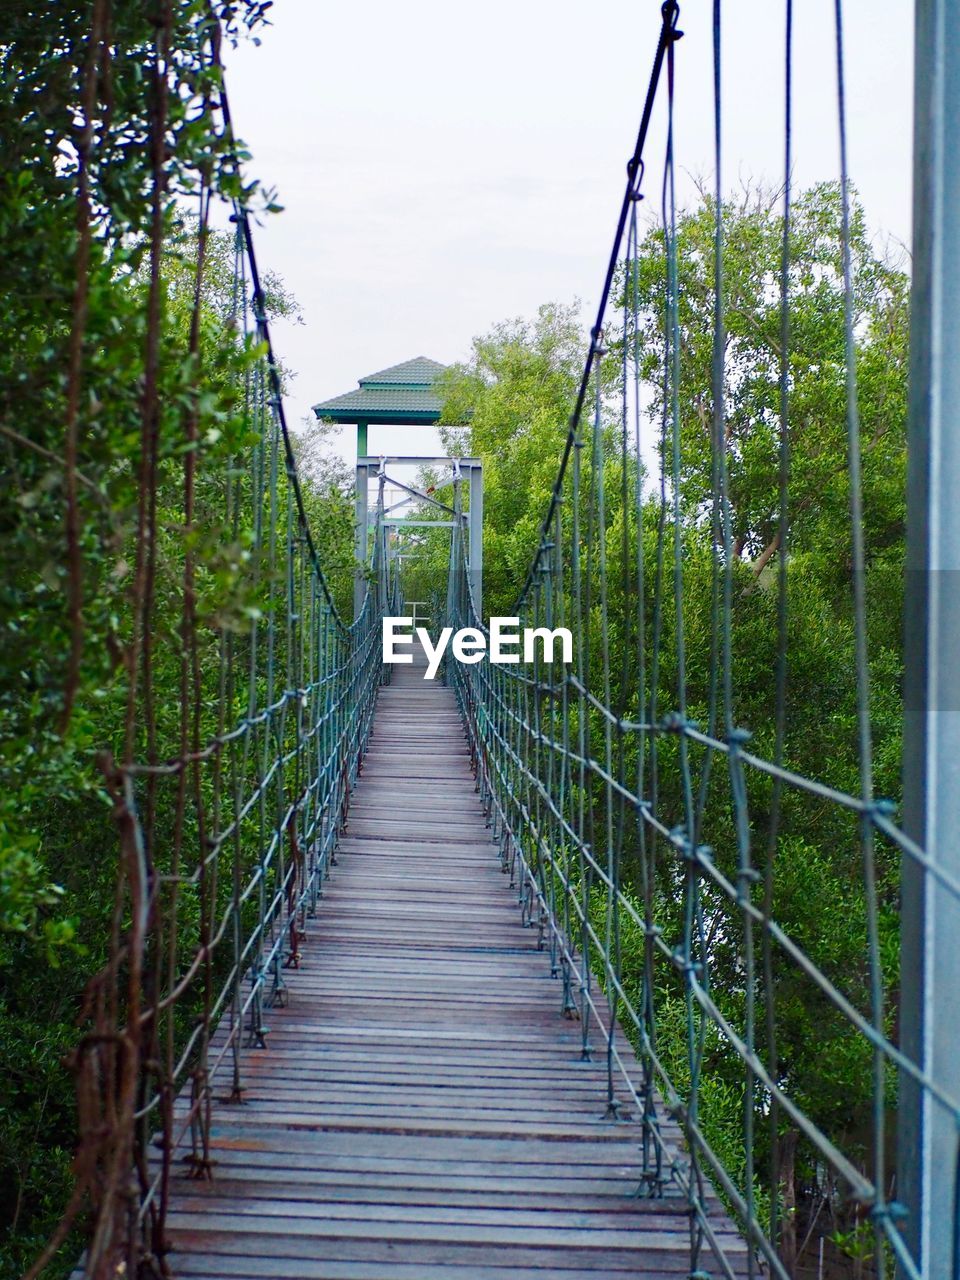 FOOTBRIDGE AMIDST TREES AND PLANTS IN FOREST